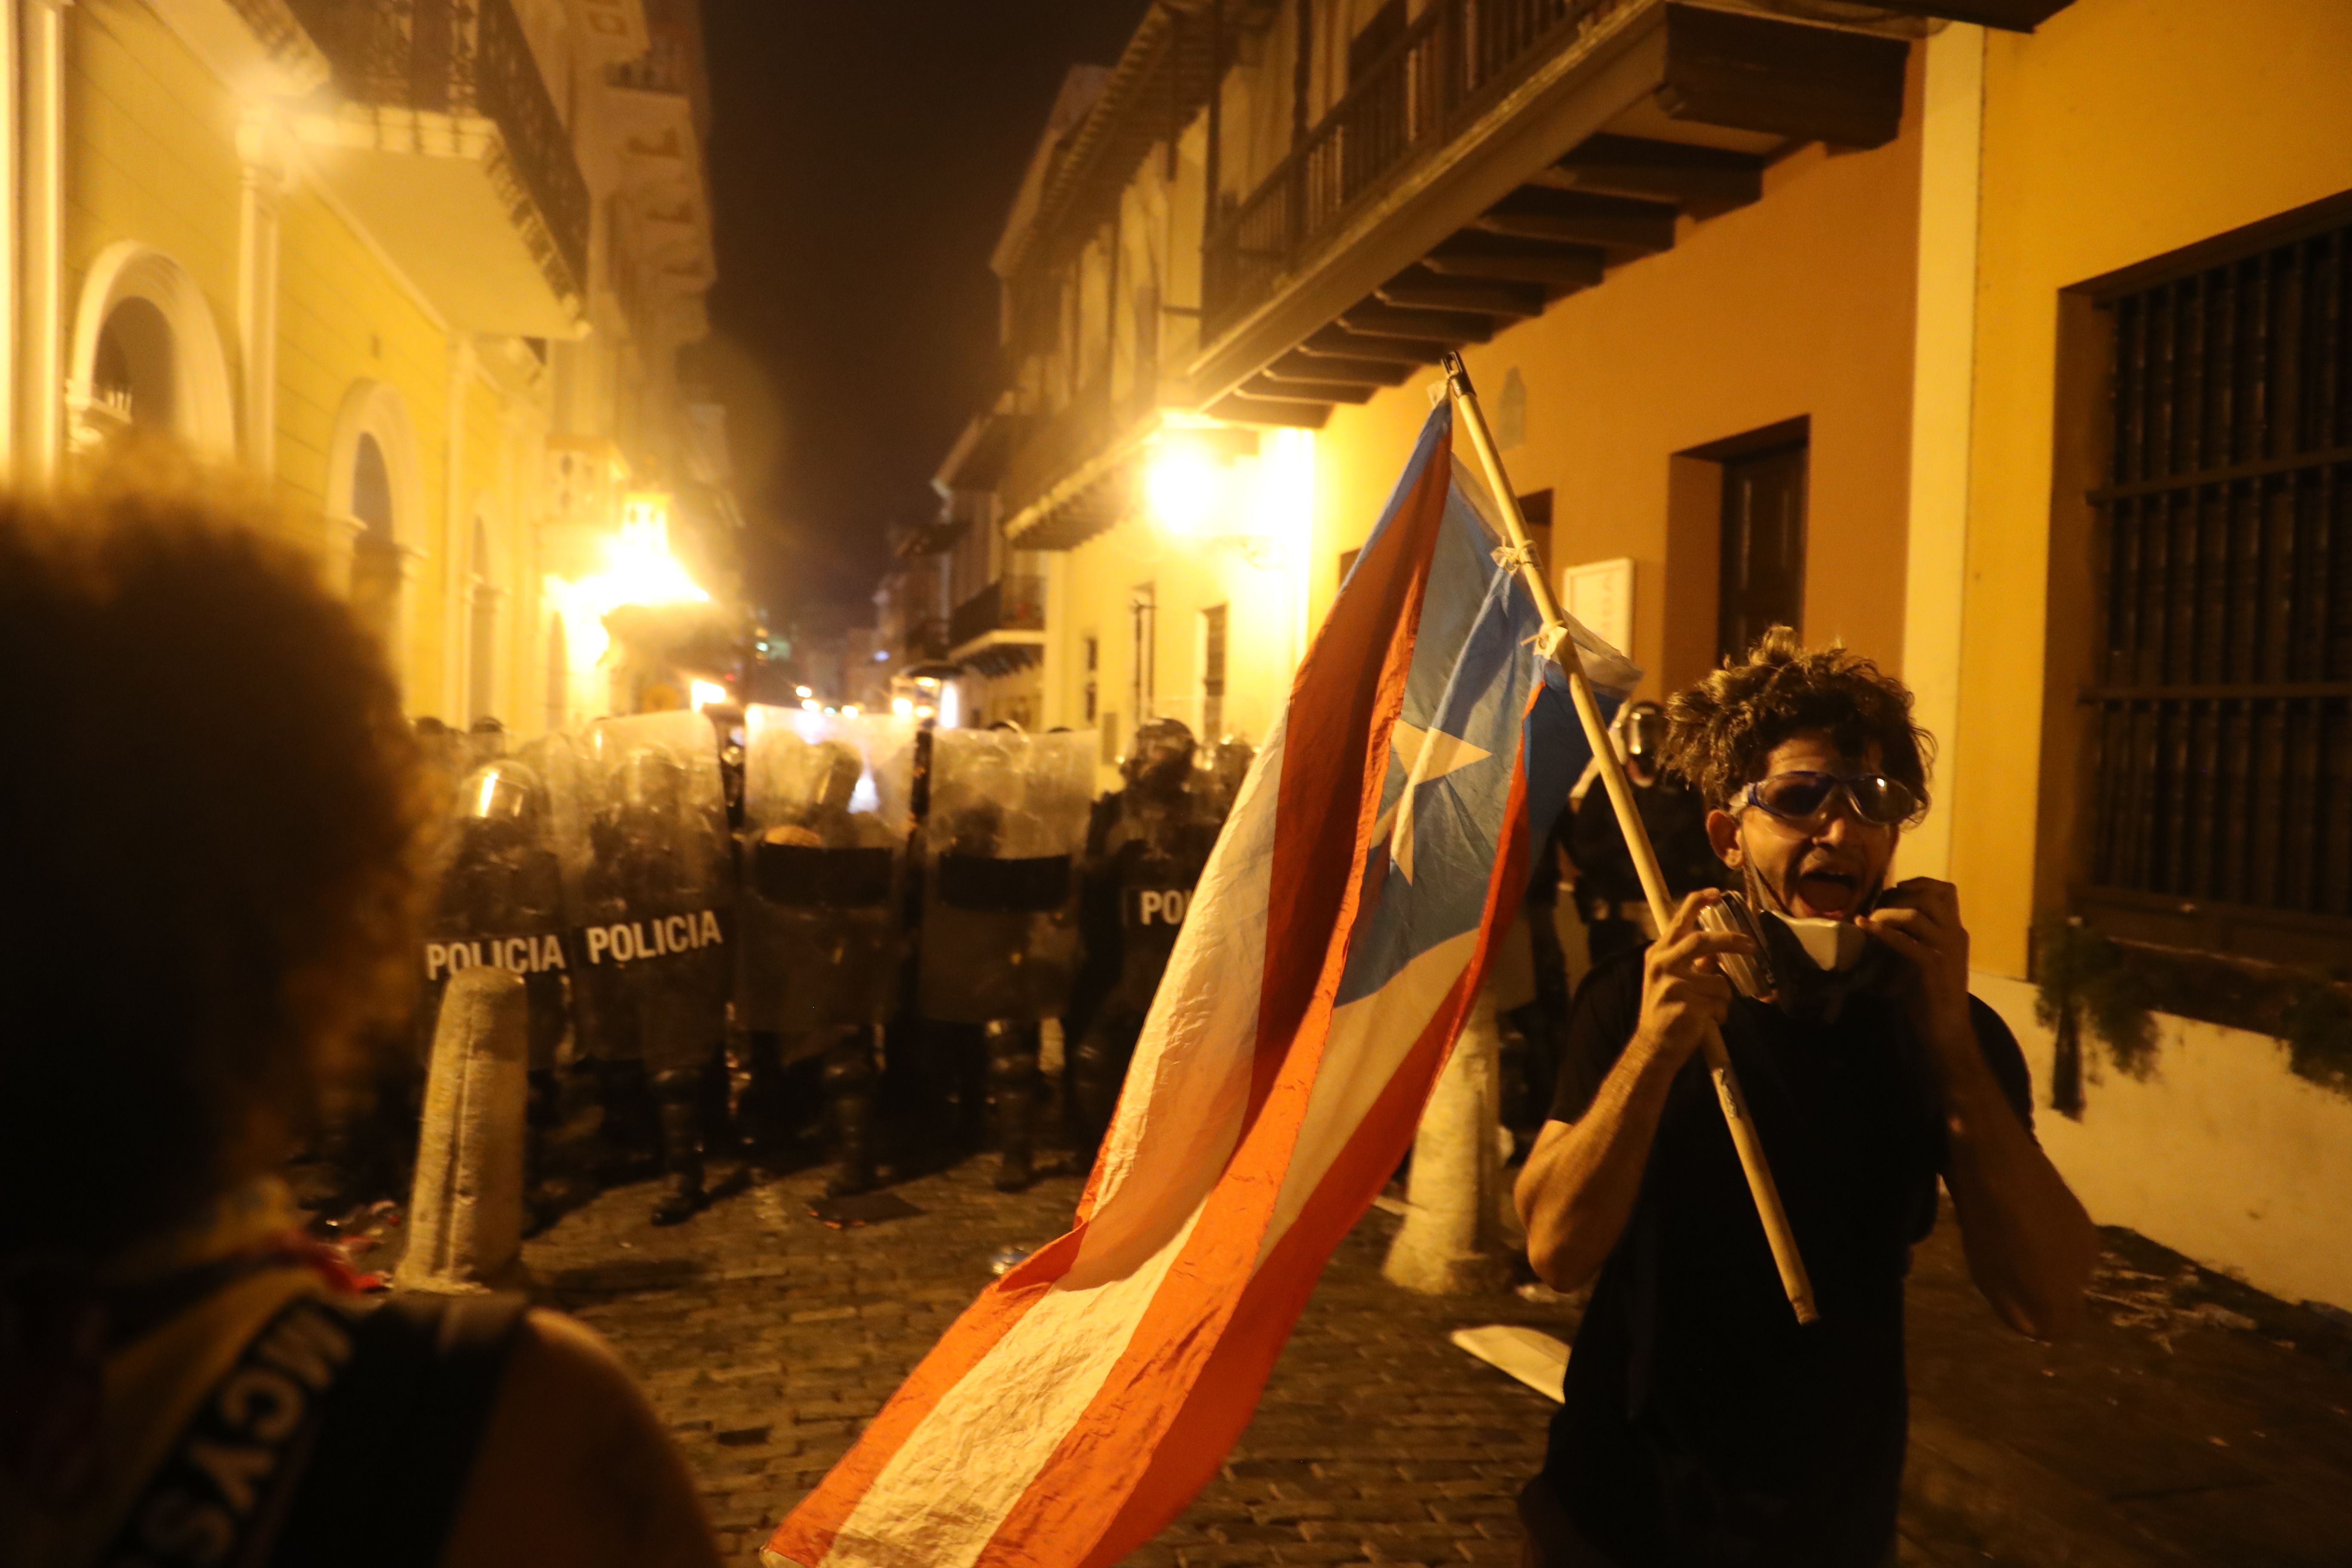 Demonstrators and police face off during a protest against Ricardo Rossello, the governor of Puerto Rico on July 17, 2019 in Old San Juan, Puerto Rico.